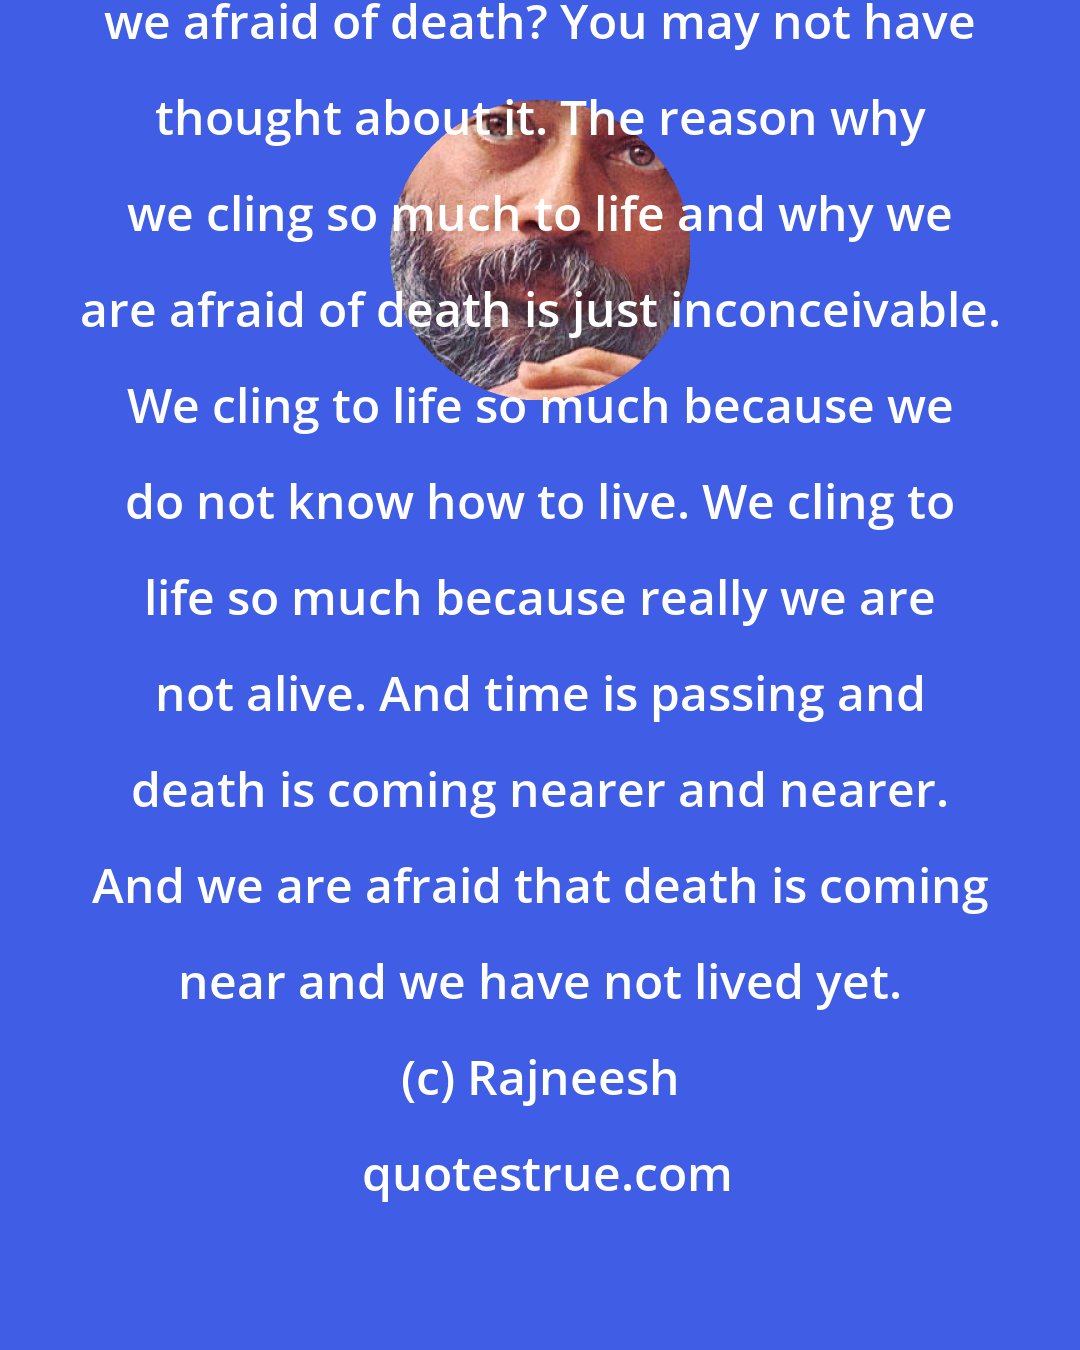 Rajneesh: Why do we cling to life and why are we afraid of death? You may not have thought about it. The reason why we cling so much to life and why we are afraid of death is just inconceivable. We cling to life so much because we do not know how to live. We cling to life so much because really we are not alive. And time is passing and death is coming nearer and nearer. And we are afraid that death is coming near and we have not lived yet.